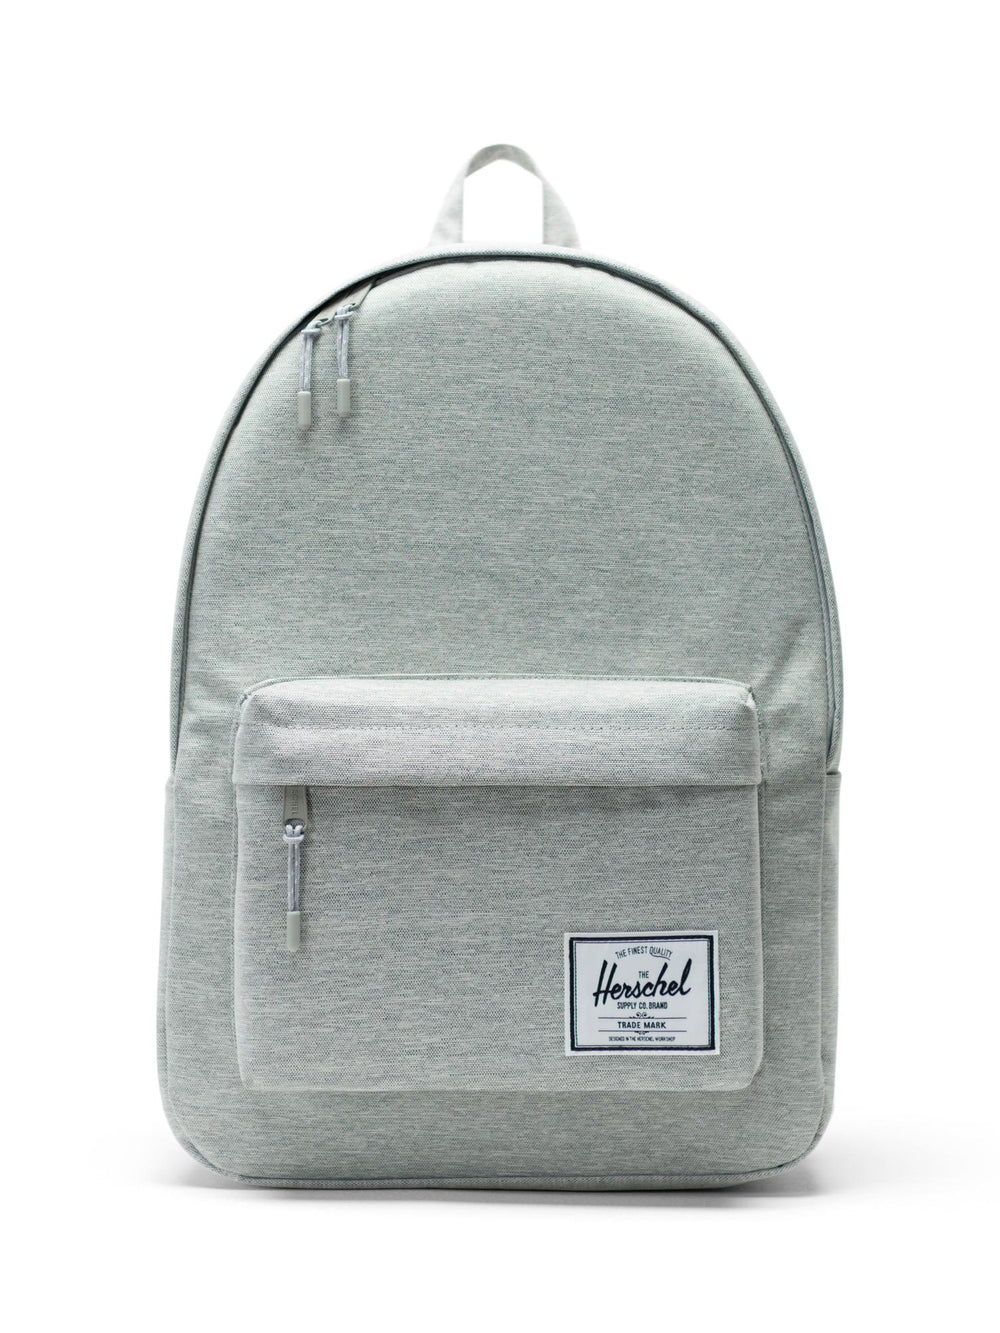 HERSCHEL SUPPLY CO. CLASSIC XLARGE 30L BACKPACK - CLEARANCE